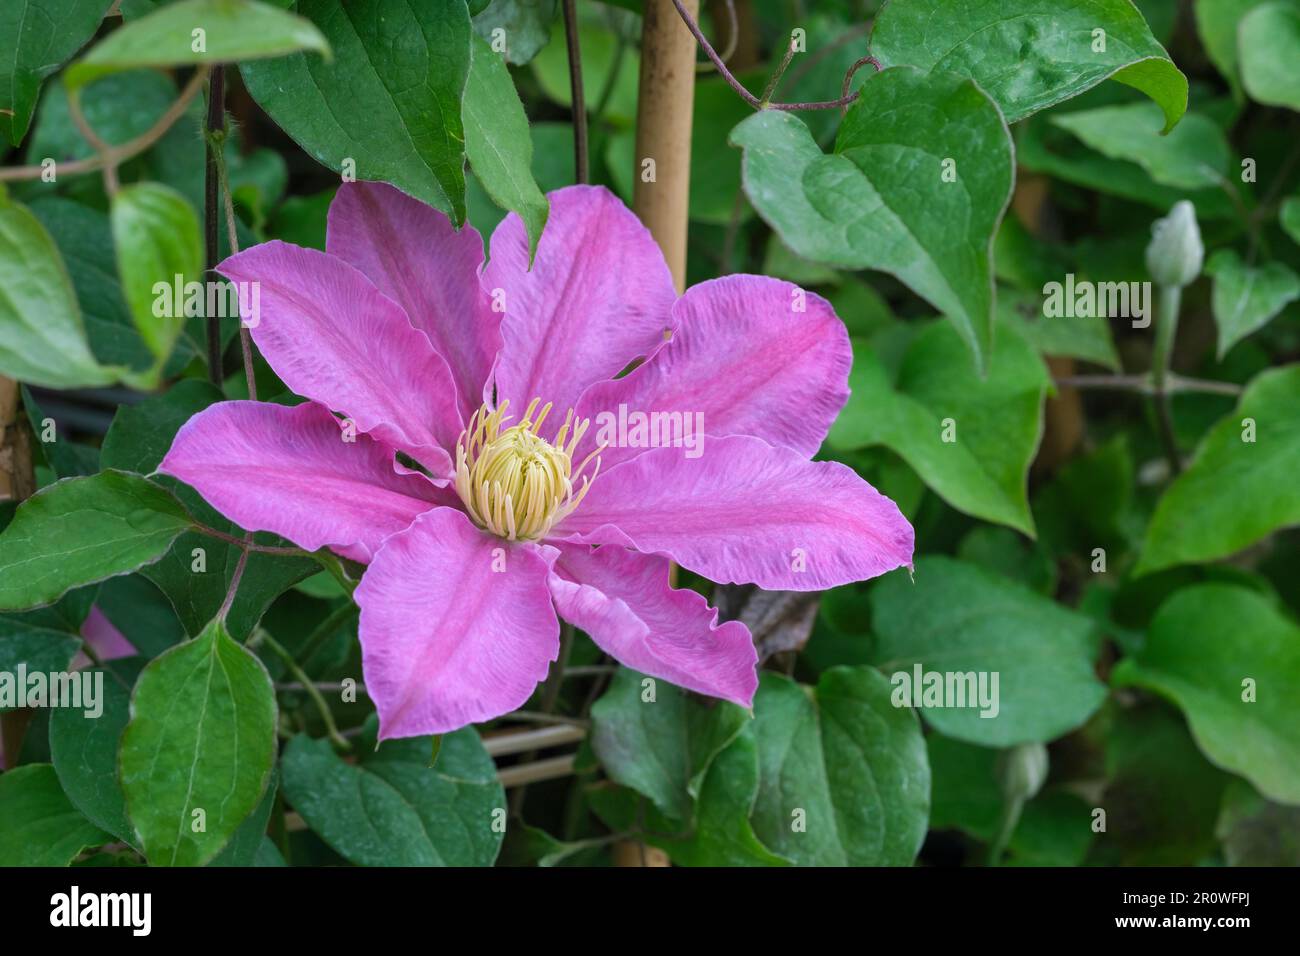 Clematis Abilene, Clematis evipo027, Early large-flowered clematis with pink-purple flowers. Stock Photo